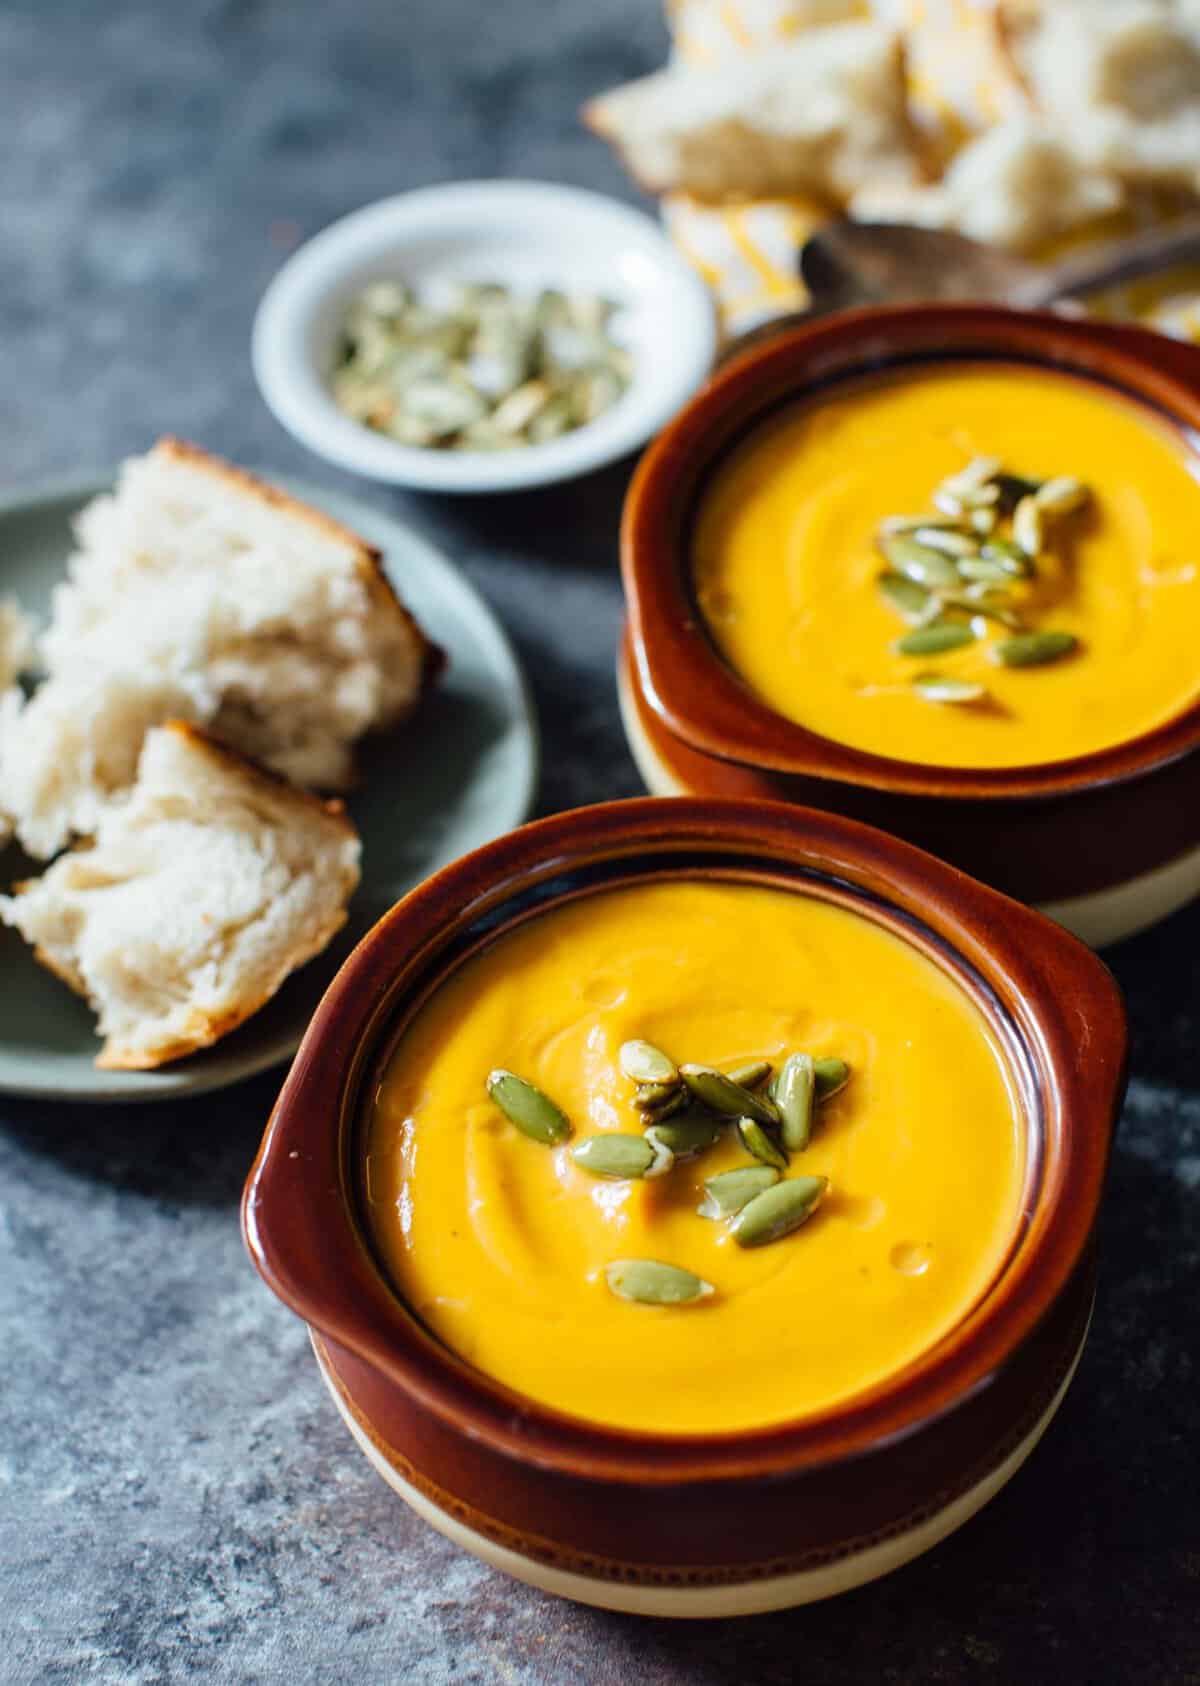 A creamy seasonal soup that you can have year-round. This Instant Pot autumn harvest butternut squash soup is a copycat from Panera that you know and love! #butternutsquash #soup #recipes #souprecipes #panera #paneracopycat #squashrecipes #falleats